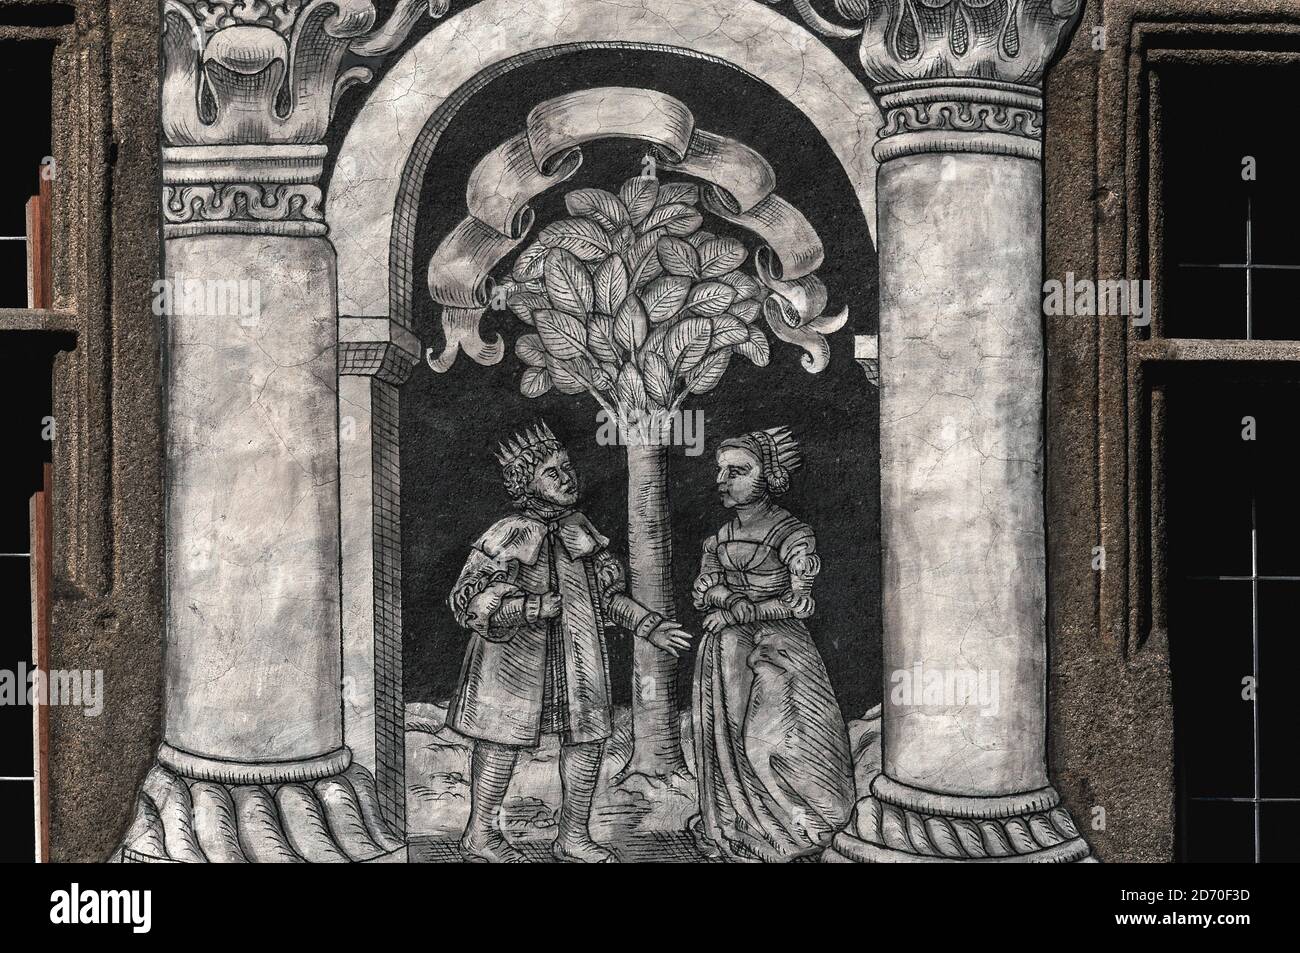 This sgraffito depiction of a Renaissance king and queen conversing on  either side of a tree is one of two scenes, framed by columns, etched  between windows in the ornate restored 16th